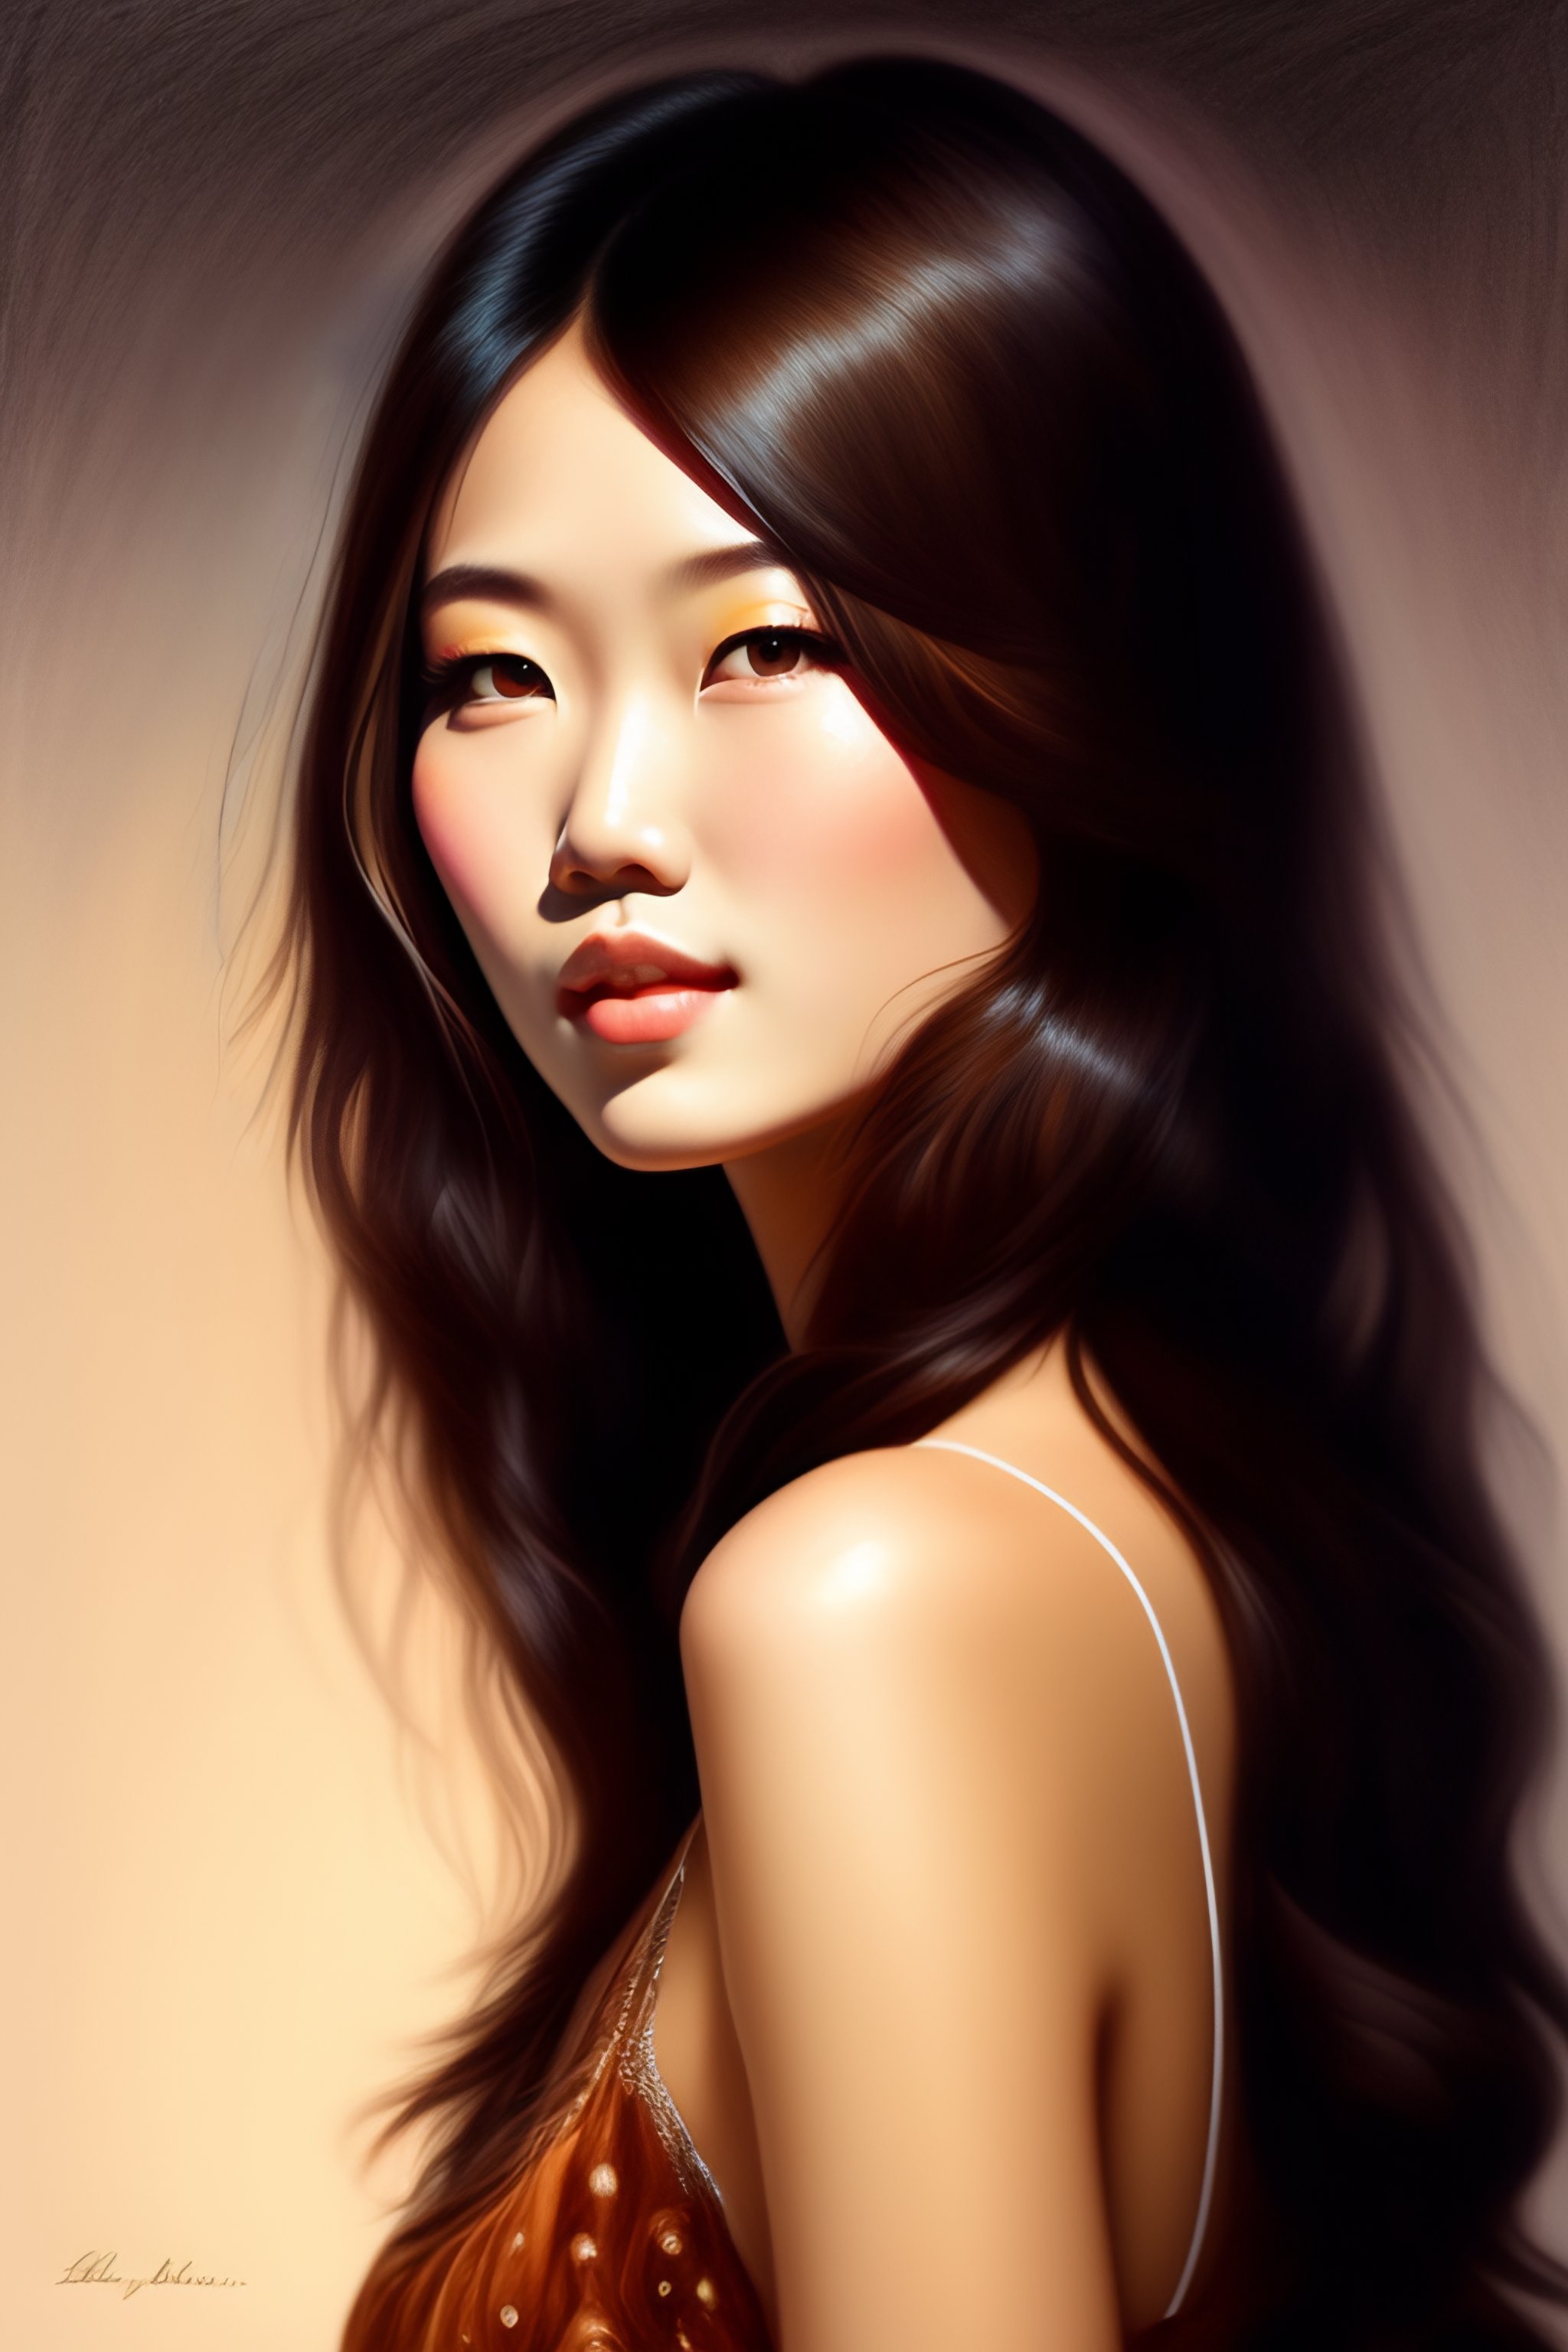 drawing of a girl with brown hair